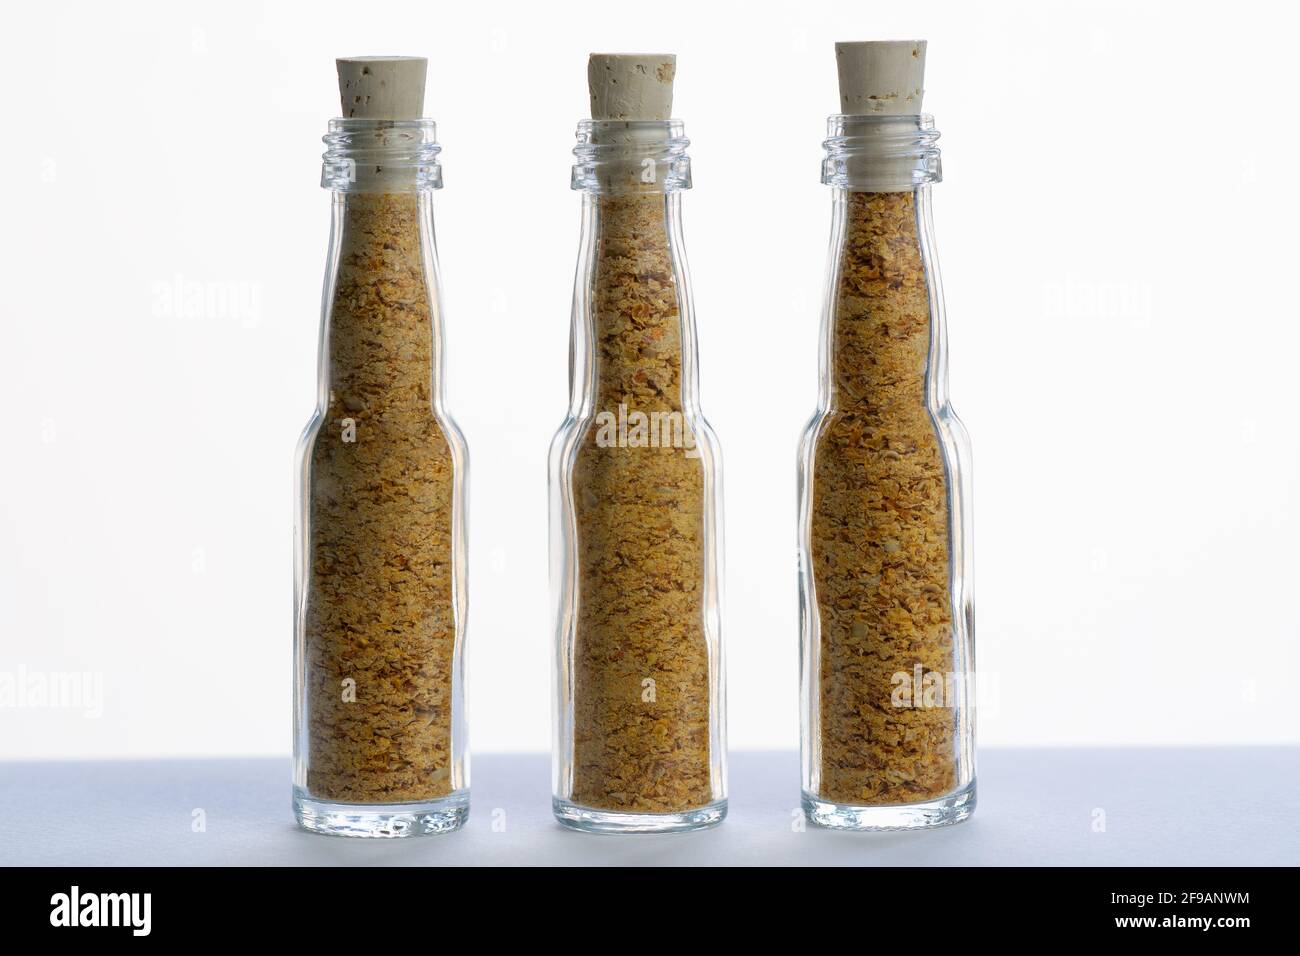 Ground dry Trinidad Scorpion Yellow peppers in three small glass bottles. Flacons are sealed with cork stoppers. Stock Photo